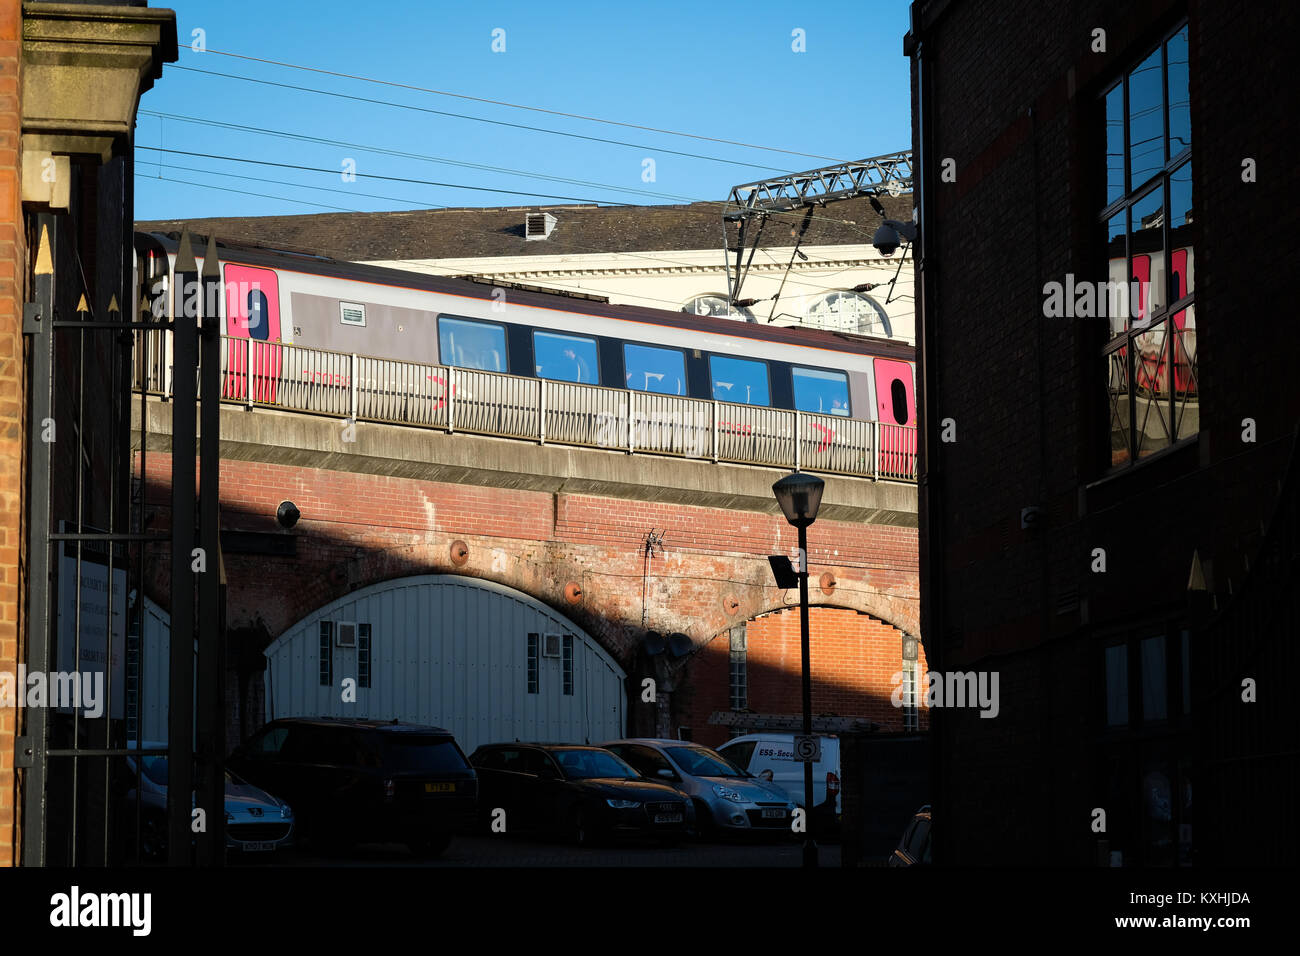 A CrossCounty train passing over shops and buildings on an elevate rail track in Leeds city centre, Yorkshire, UK Stock Photo